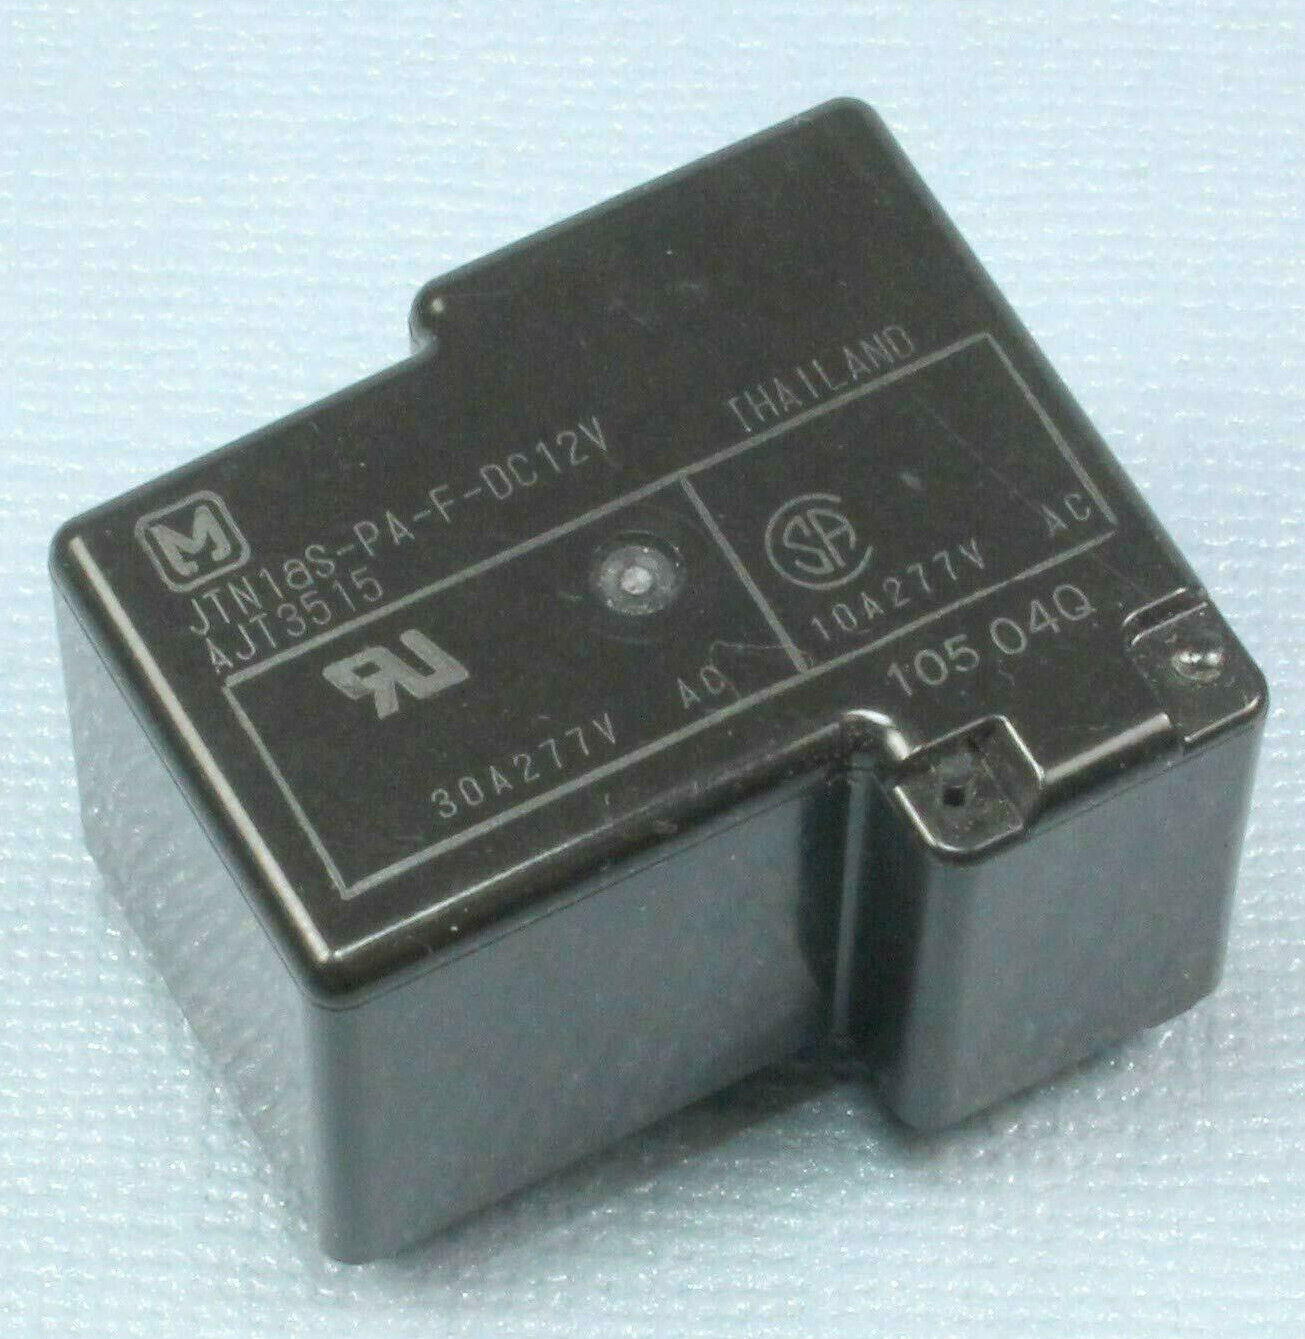 replacement relay for g8p-1a4p 12vdc, 30a 250vac maytag whirlpool kenmore dry...